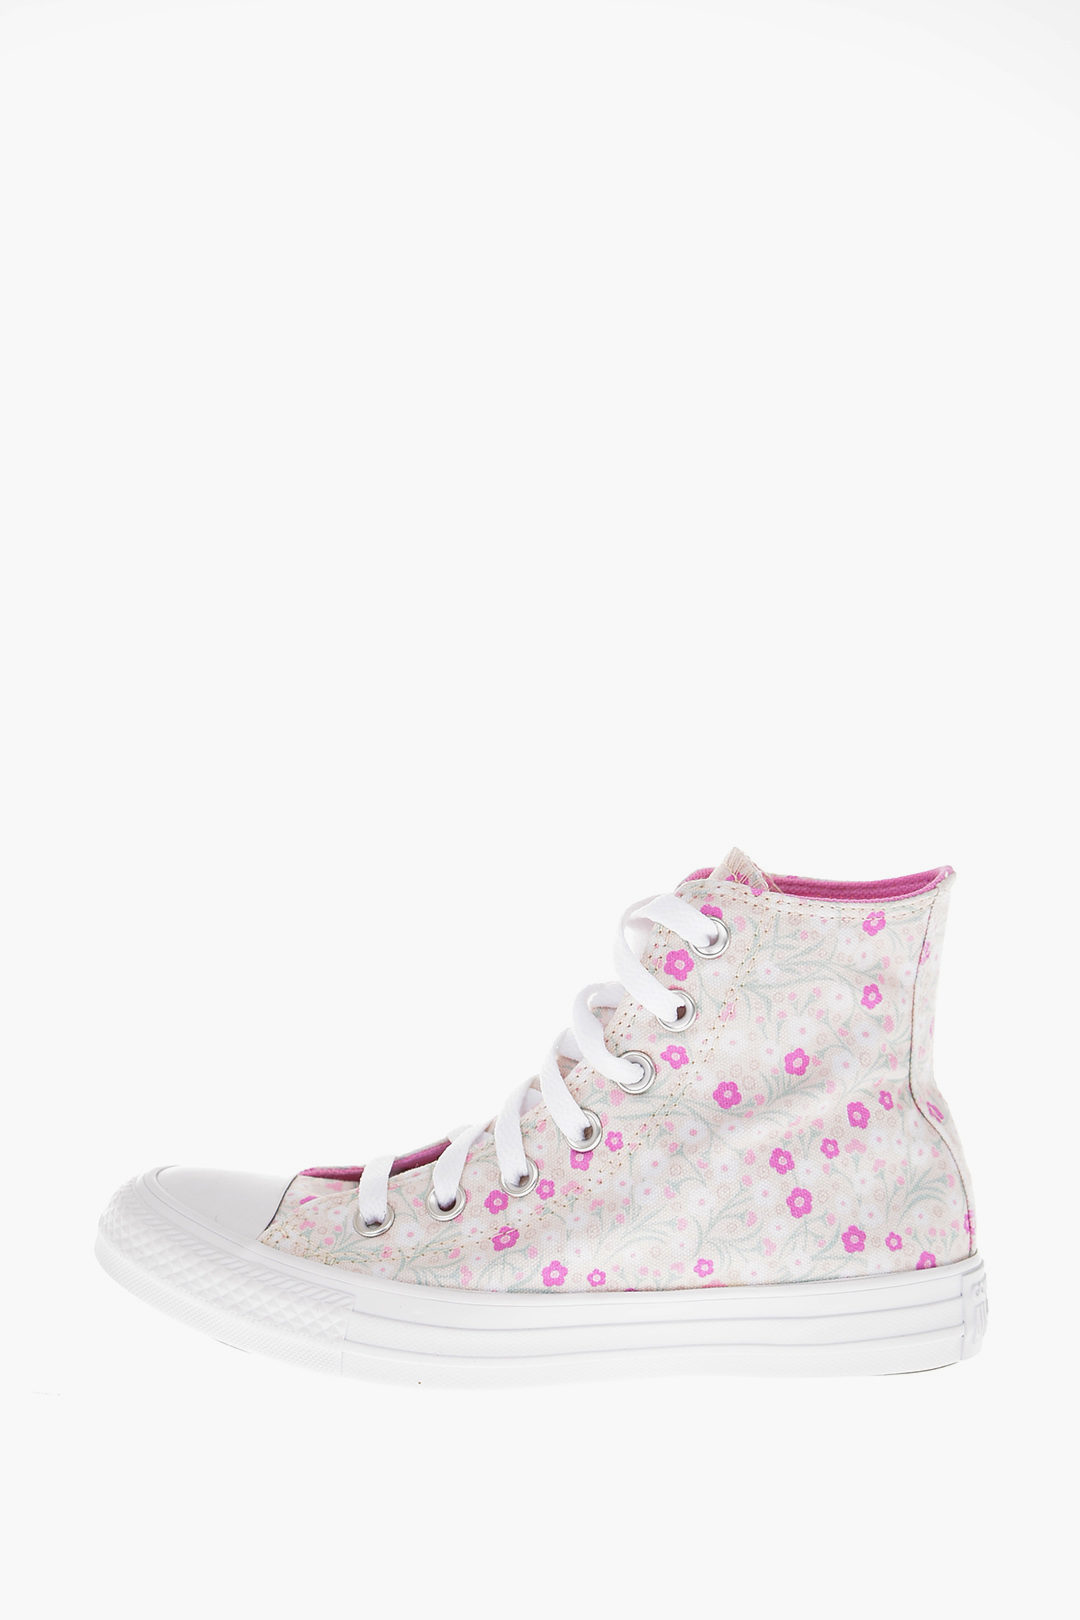 Converse CHUCK TAYLOR ALL STAR Floral 